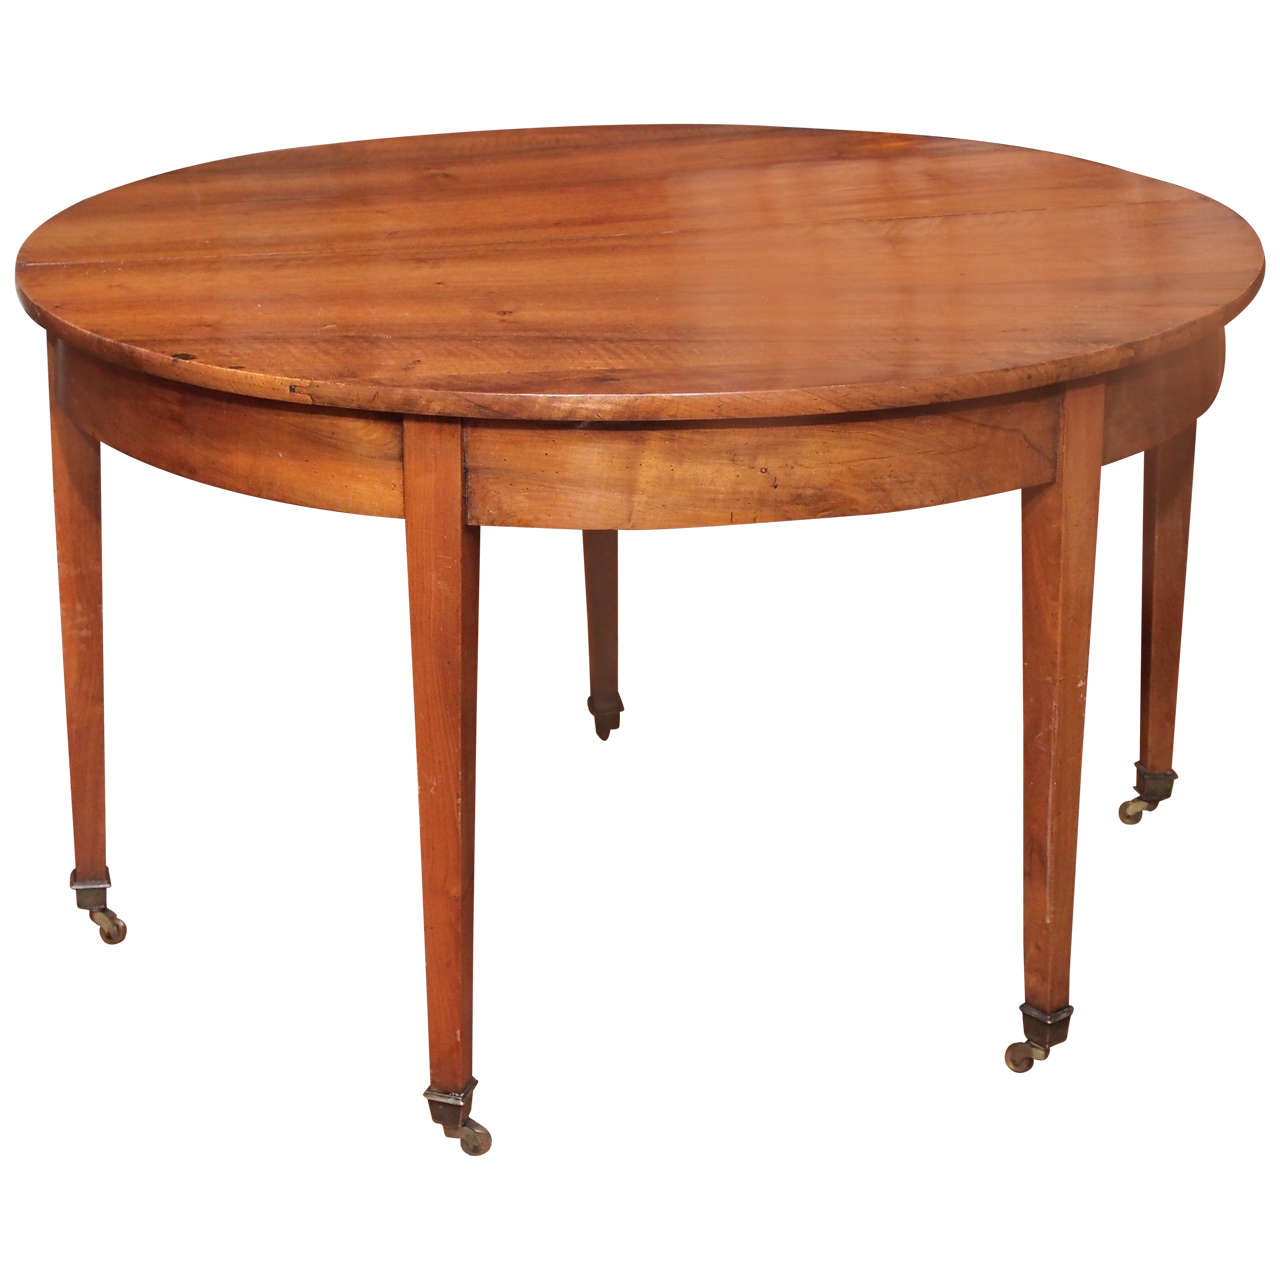 French Directoire Period Walnut Demilune Table